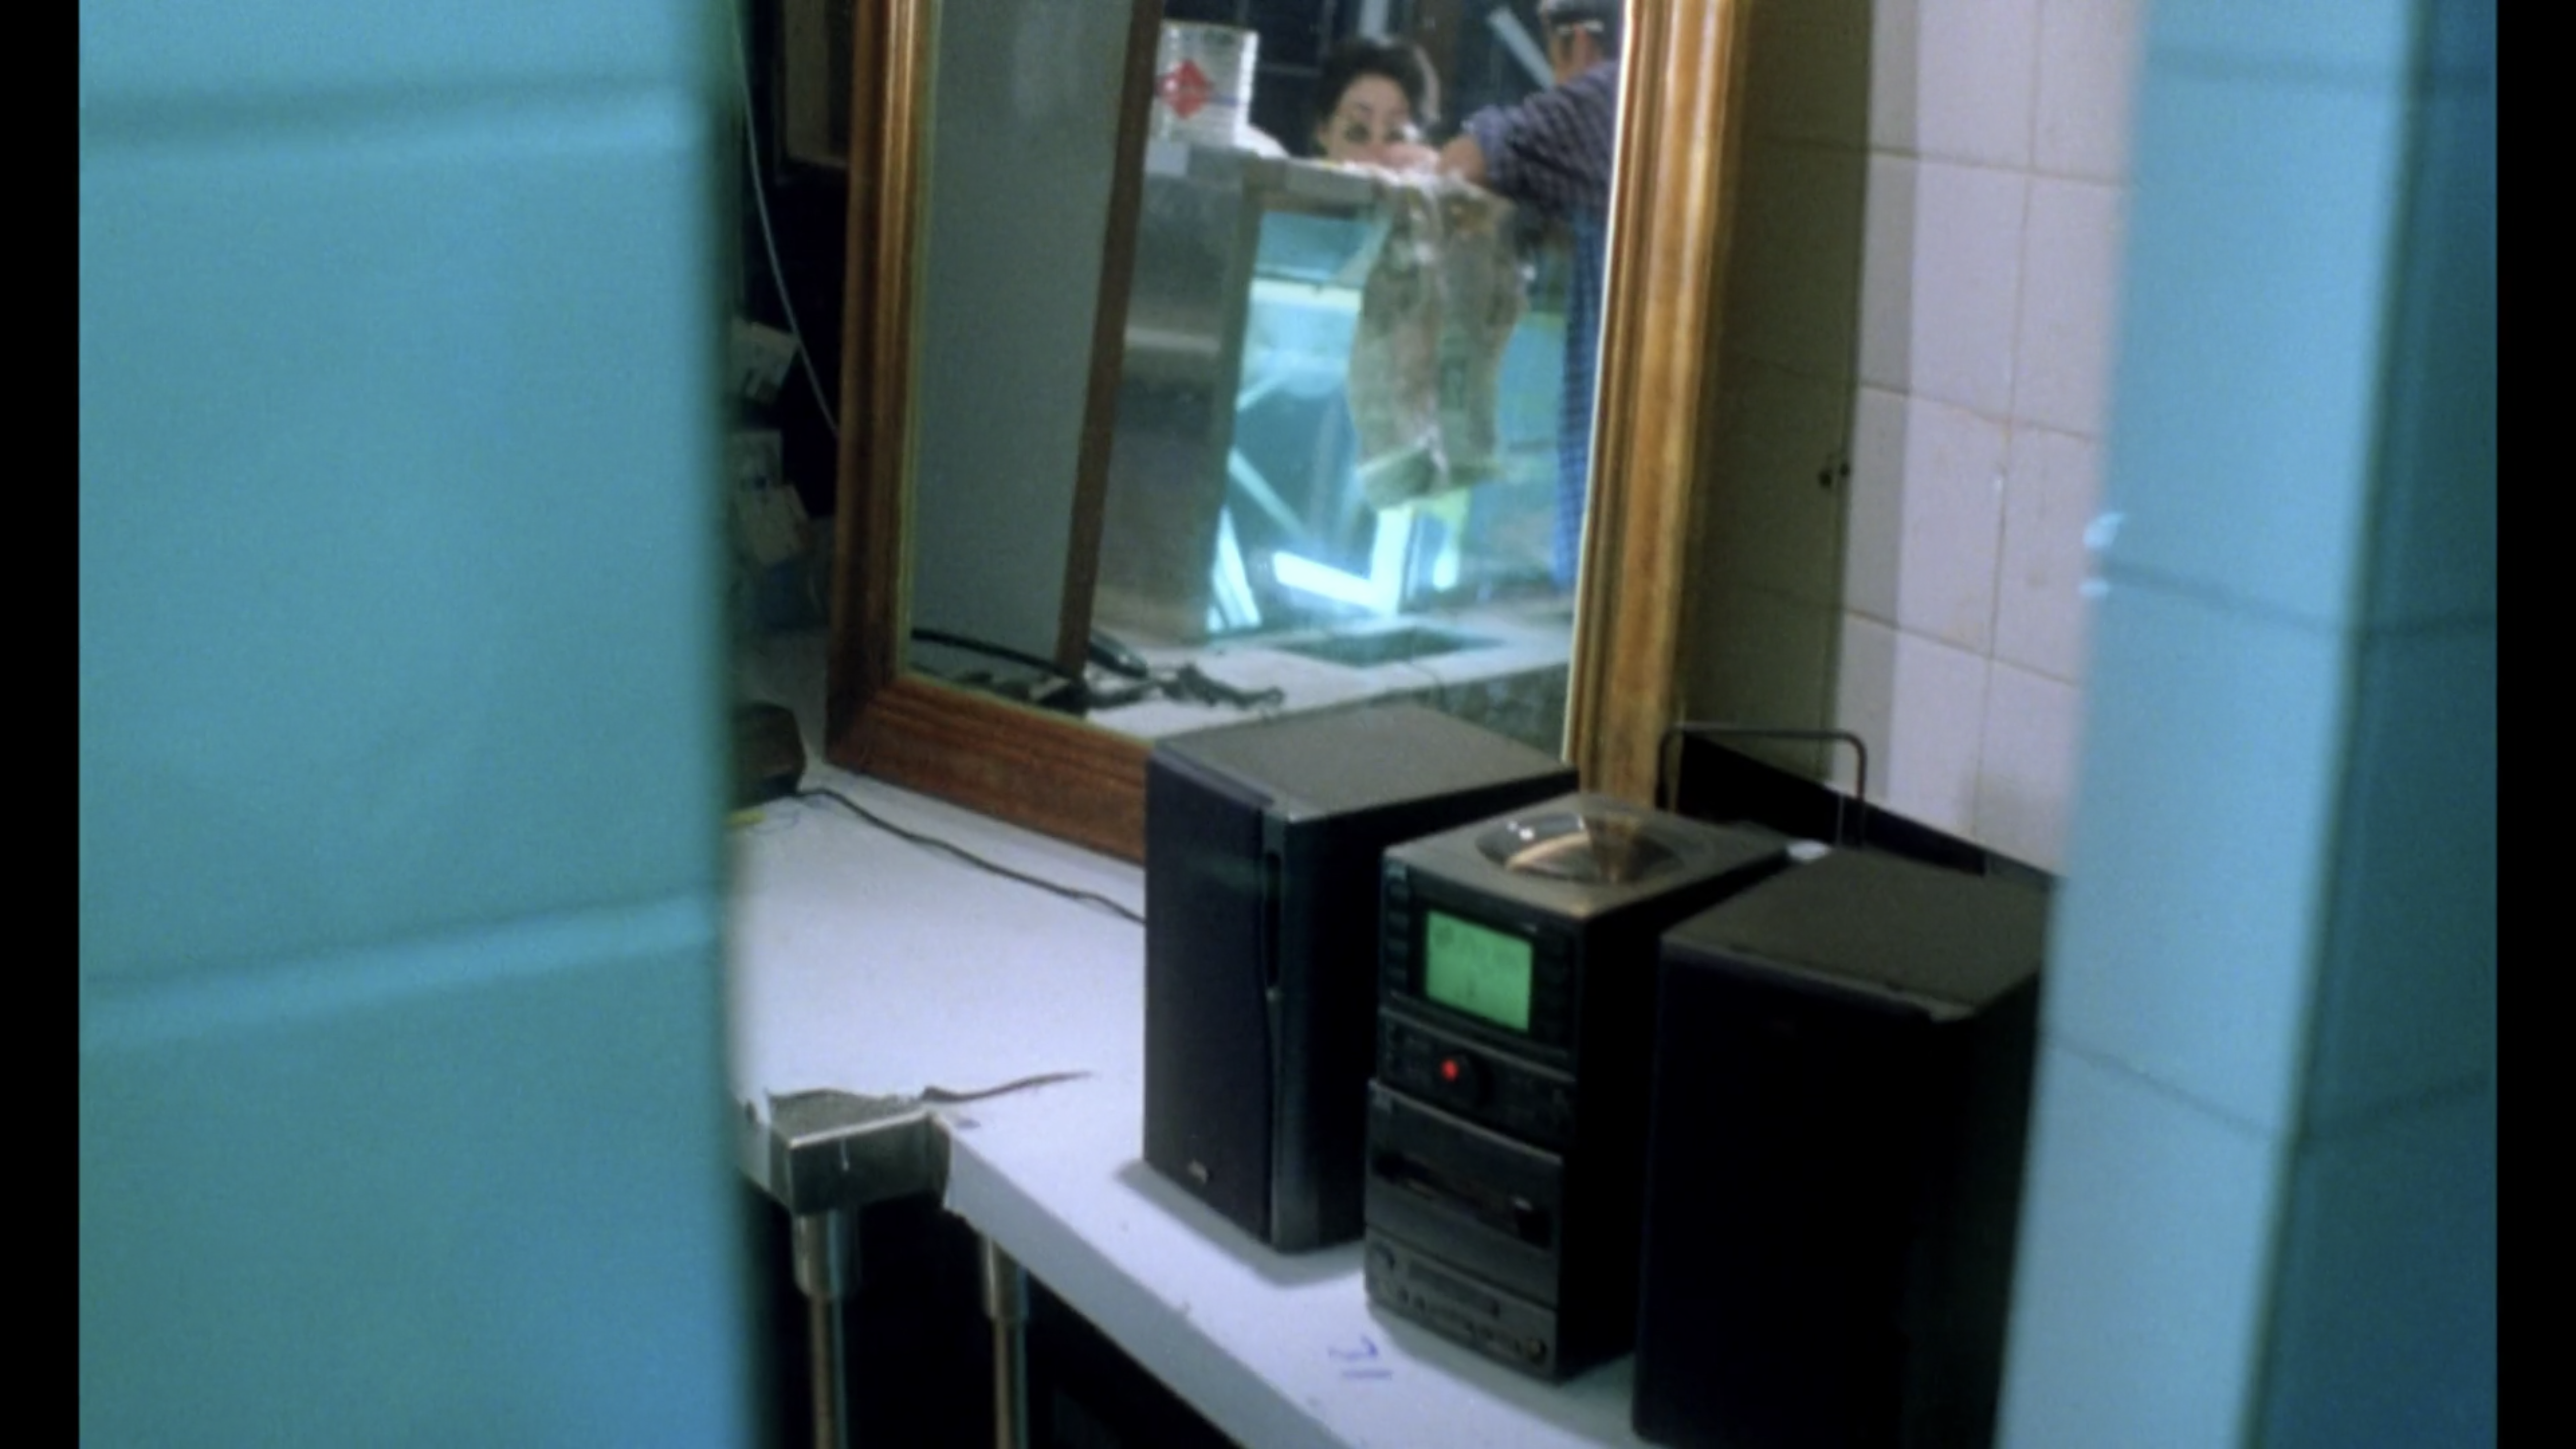 A boombox plays "Dreams" in Chungking Express